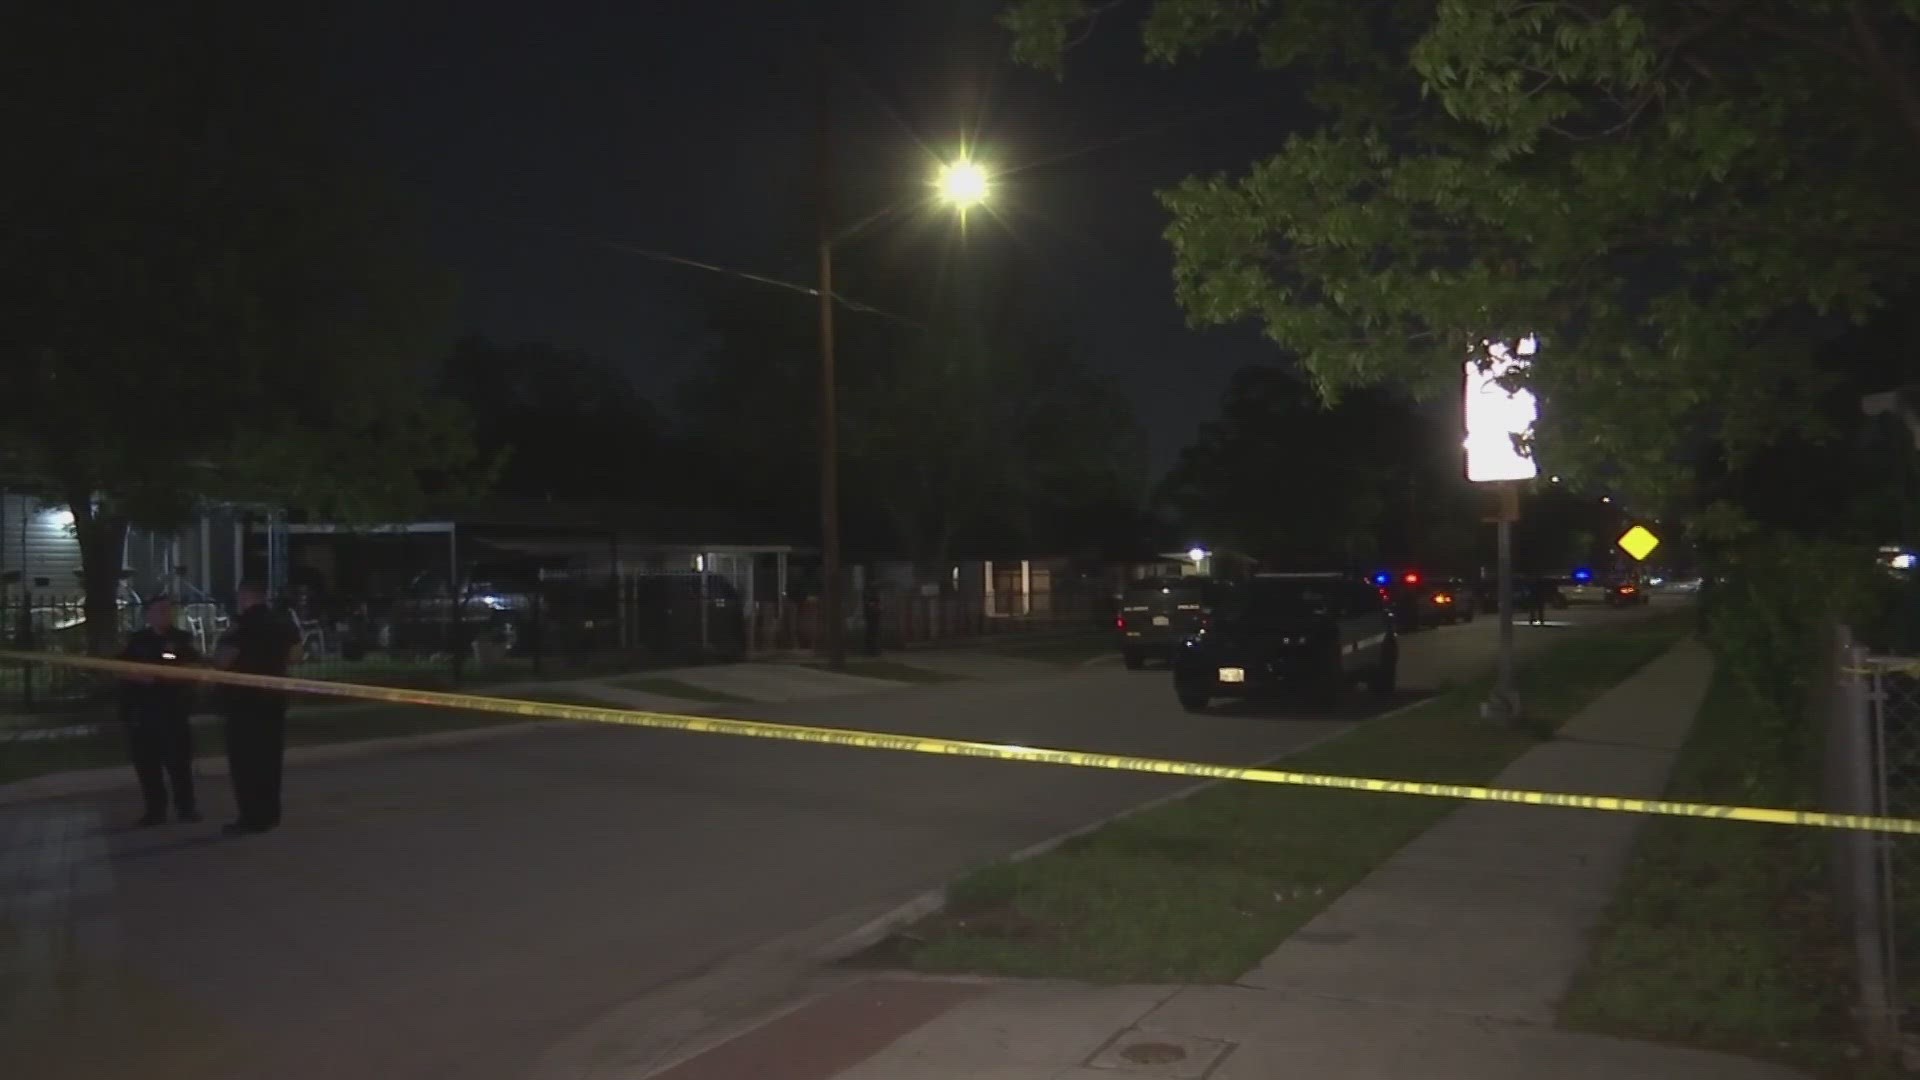 Officials say police responded to a reported shooting and found a 17-year-old male with one gunshot wound in his back.